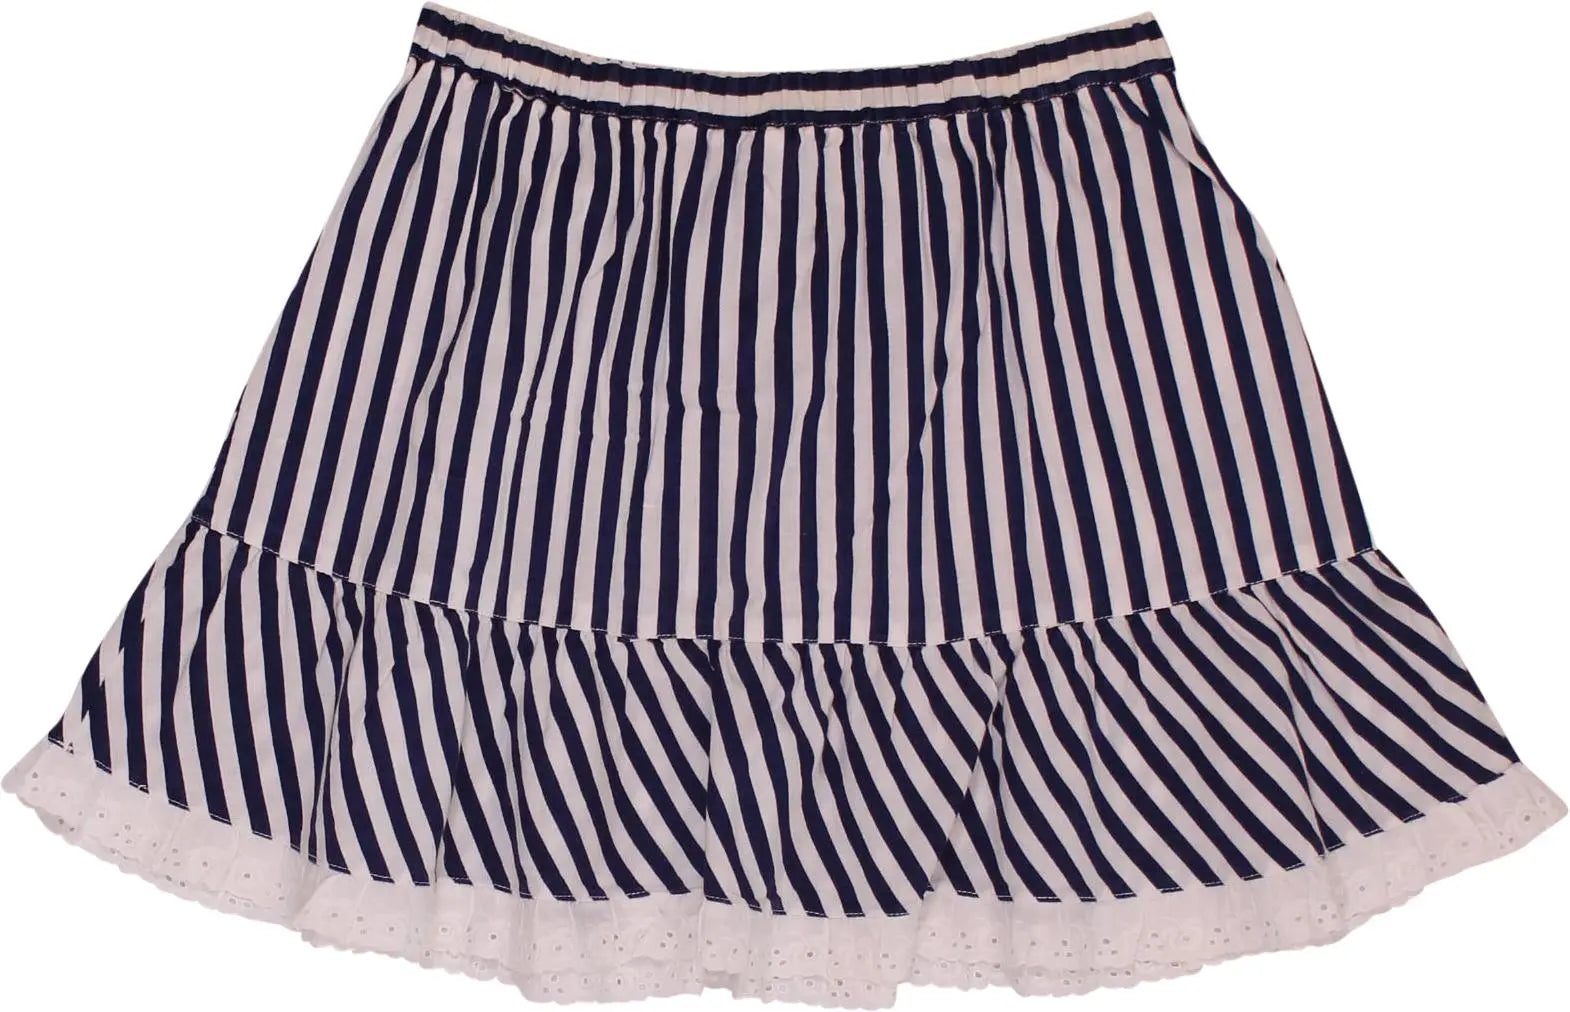 Unknown - Striped Skirt- ThriftTale.com - Vintage and second handclothing